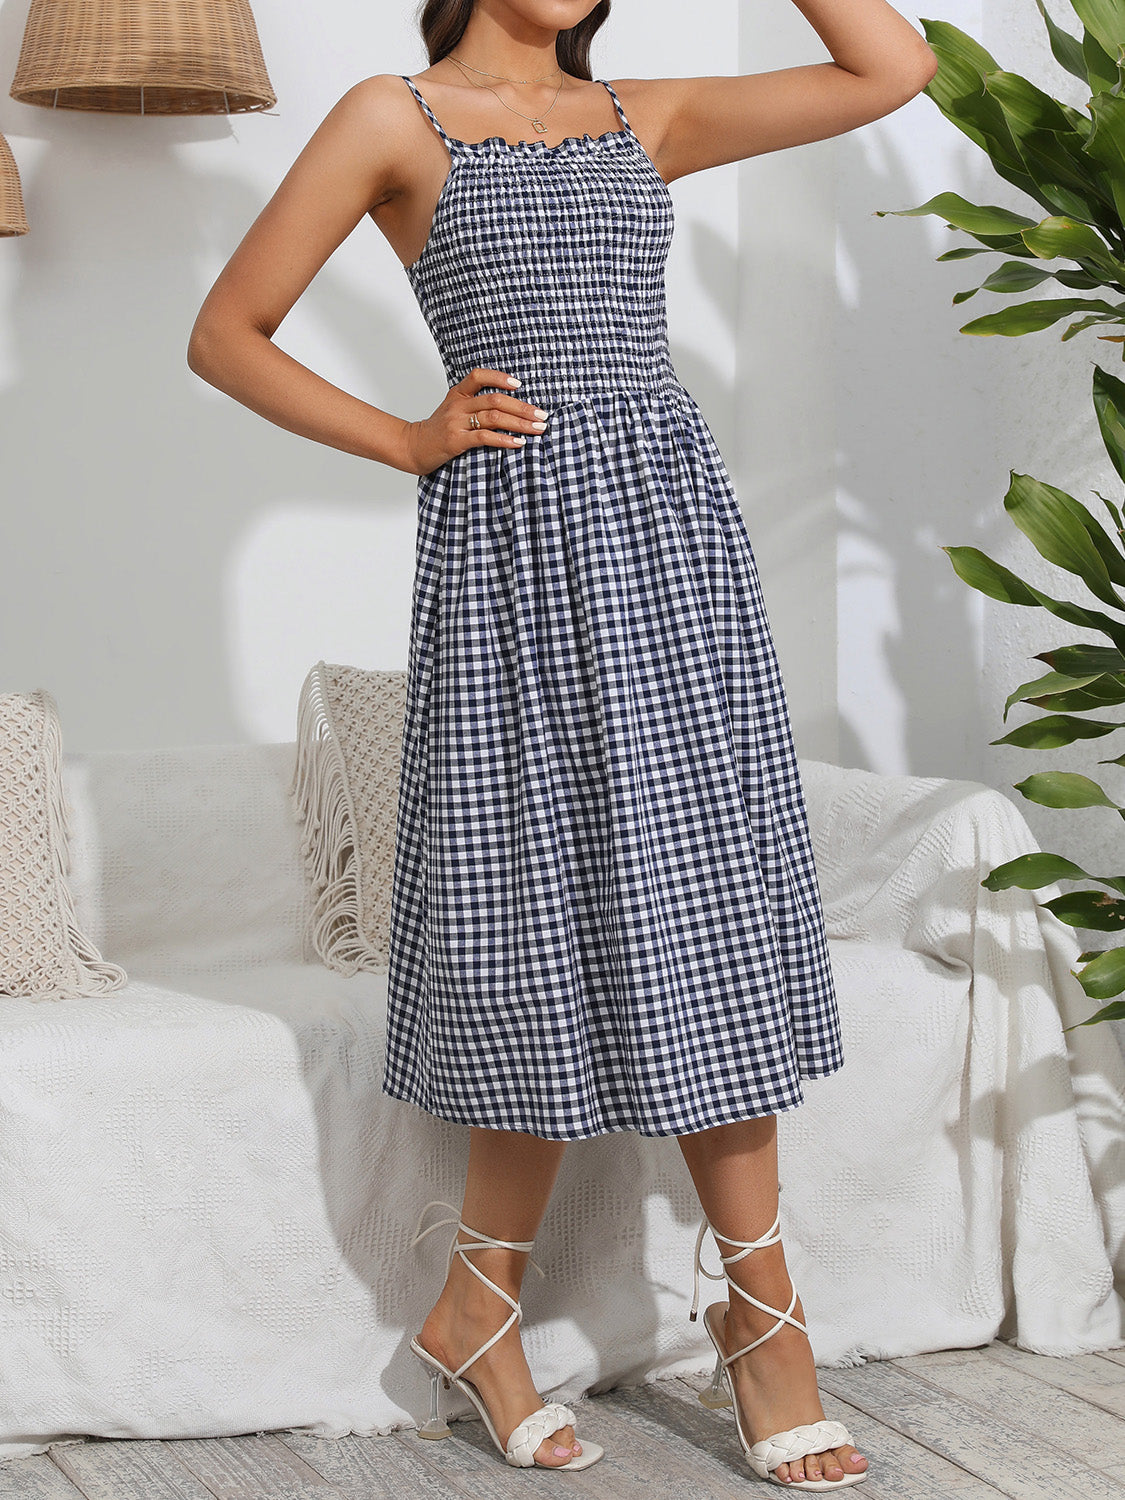 Lightweight blue gingham dress with a fitted smocked bodice